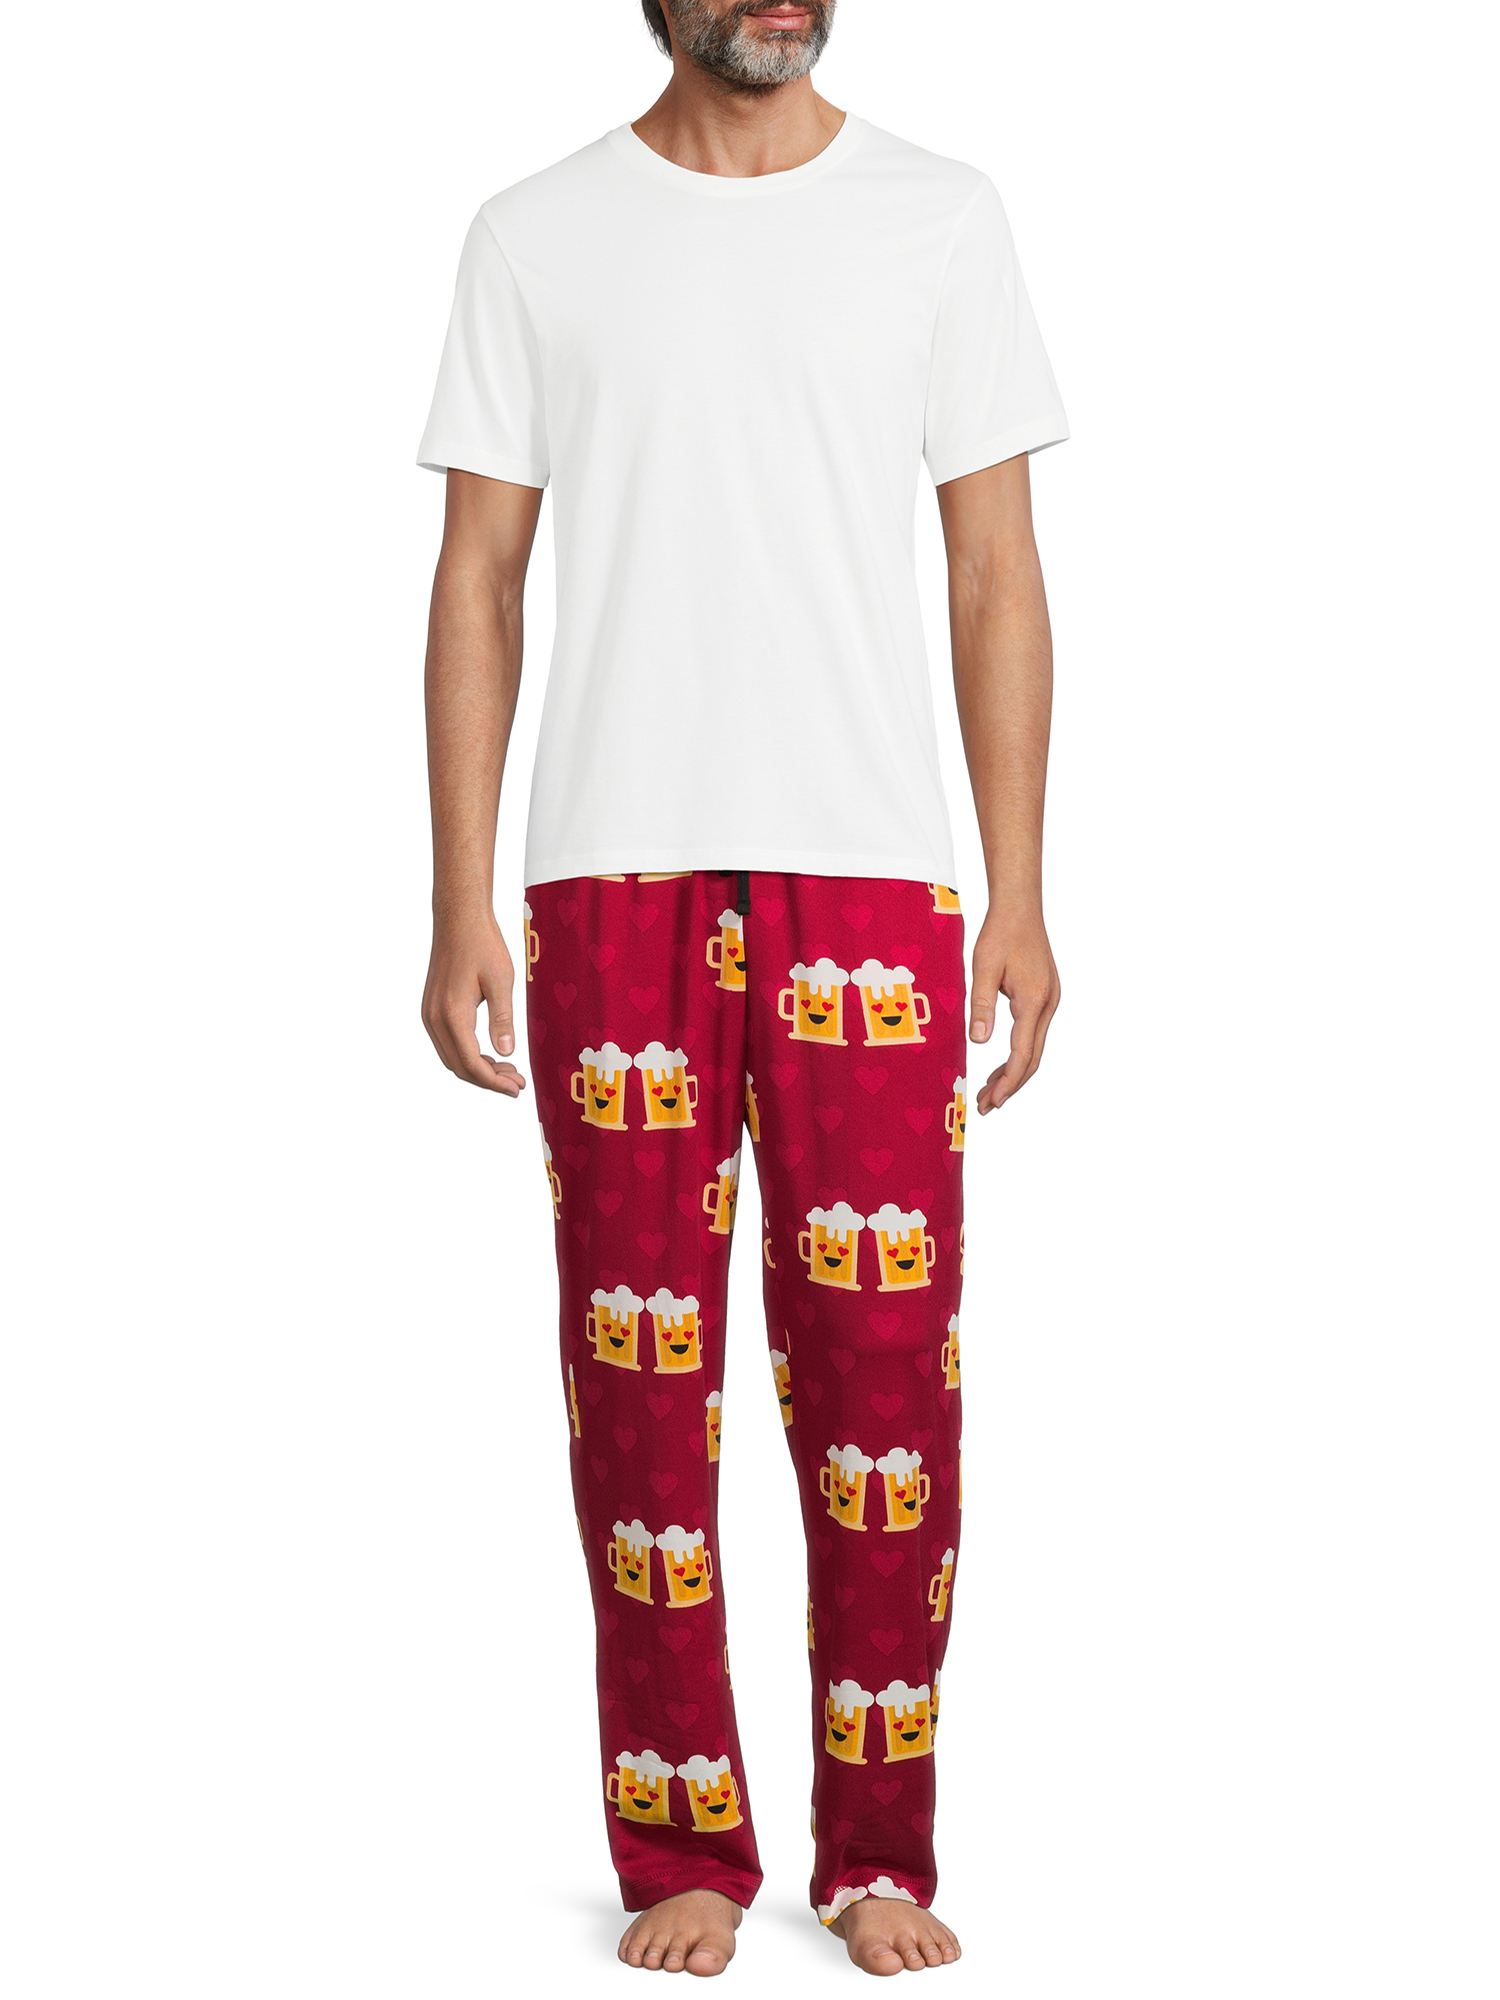 Valentine's Day Men's and Big Men's Sleep Pants, 2-Pack, Heather Red and Match Made Beer Designs - image 4 of 5